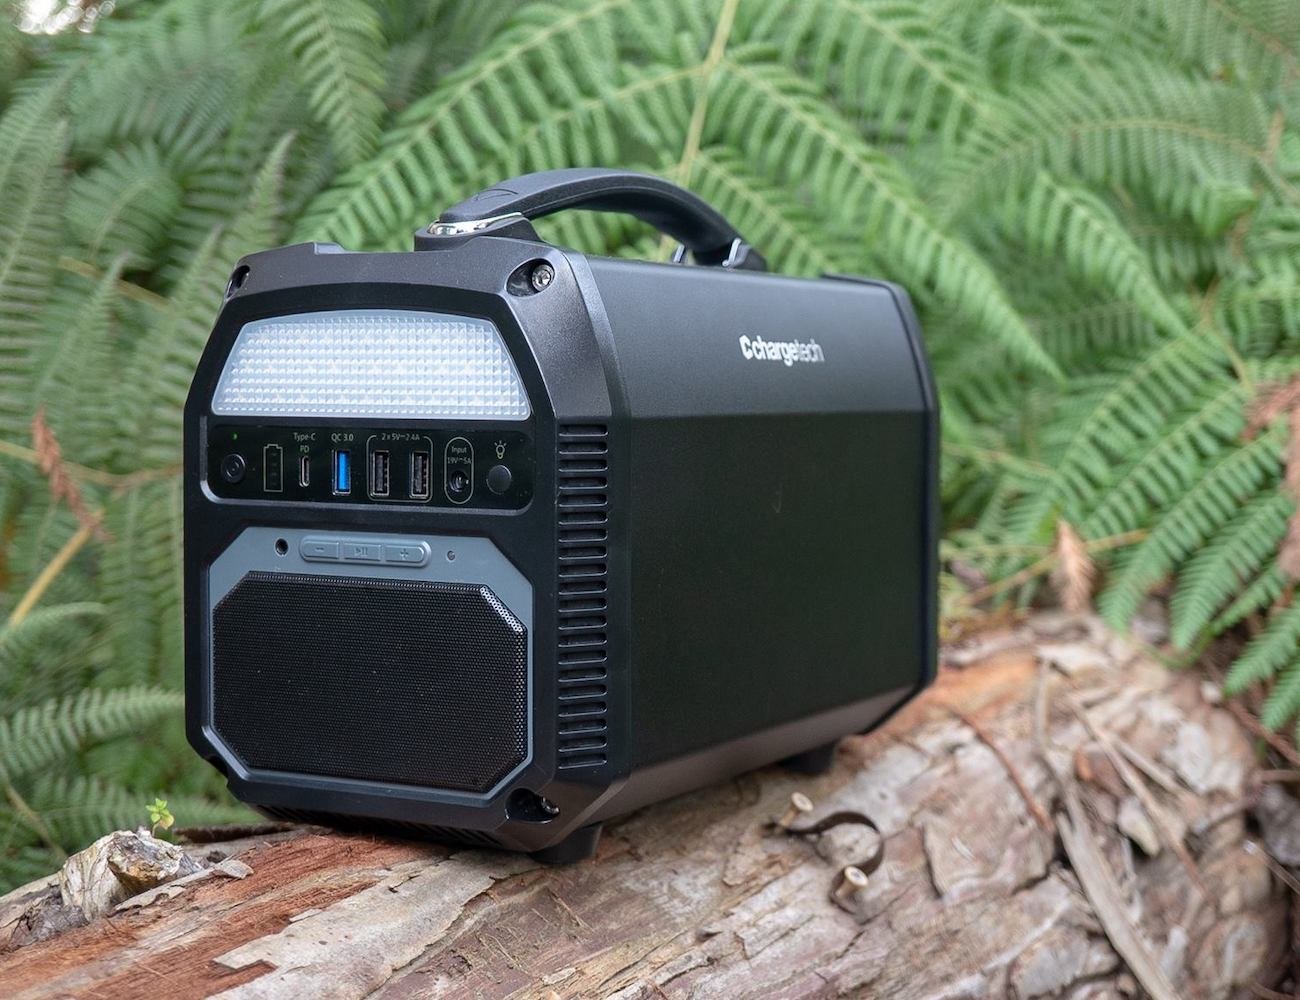 ChargeTech Portable AC Power Station has a 124,000 mAh battery capacity